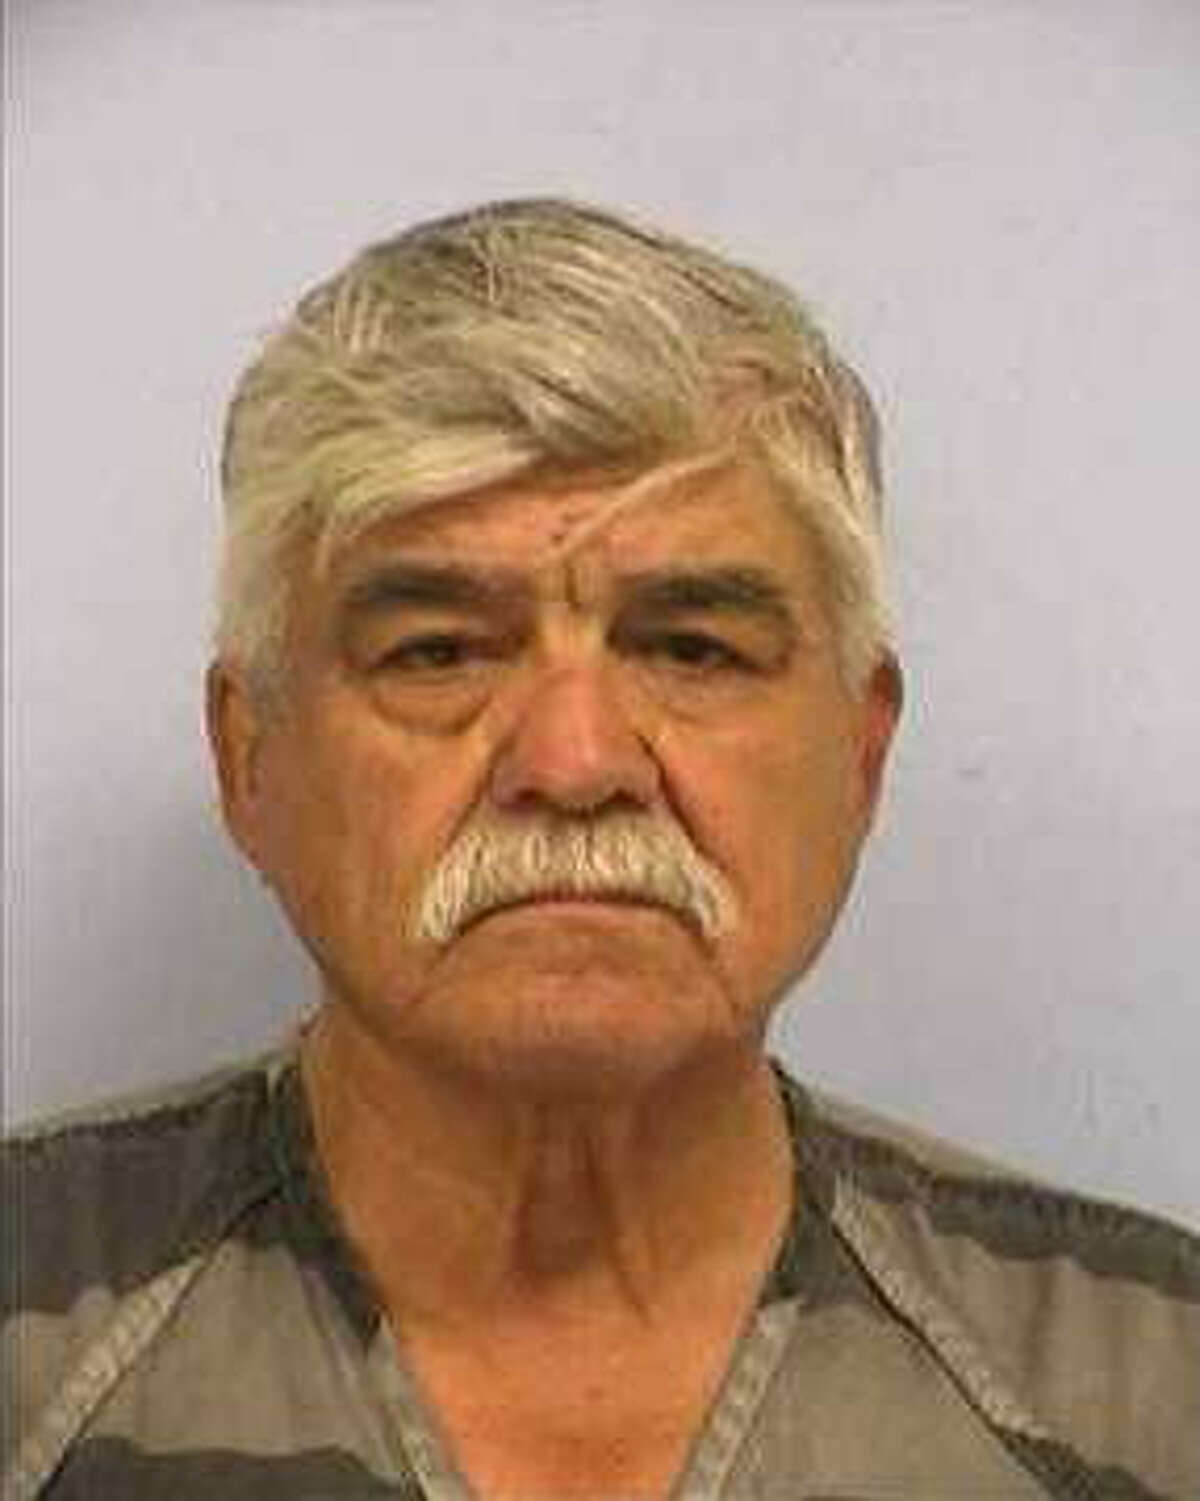 The DEA arrested 18 people in Austin, Texas on March 28, 2018 after they were accused of smuggling cocaine, meth and heroin across multiple states. Juan Vasquez, 69, was arrested as part of the sting.